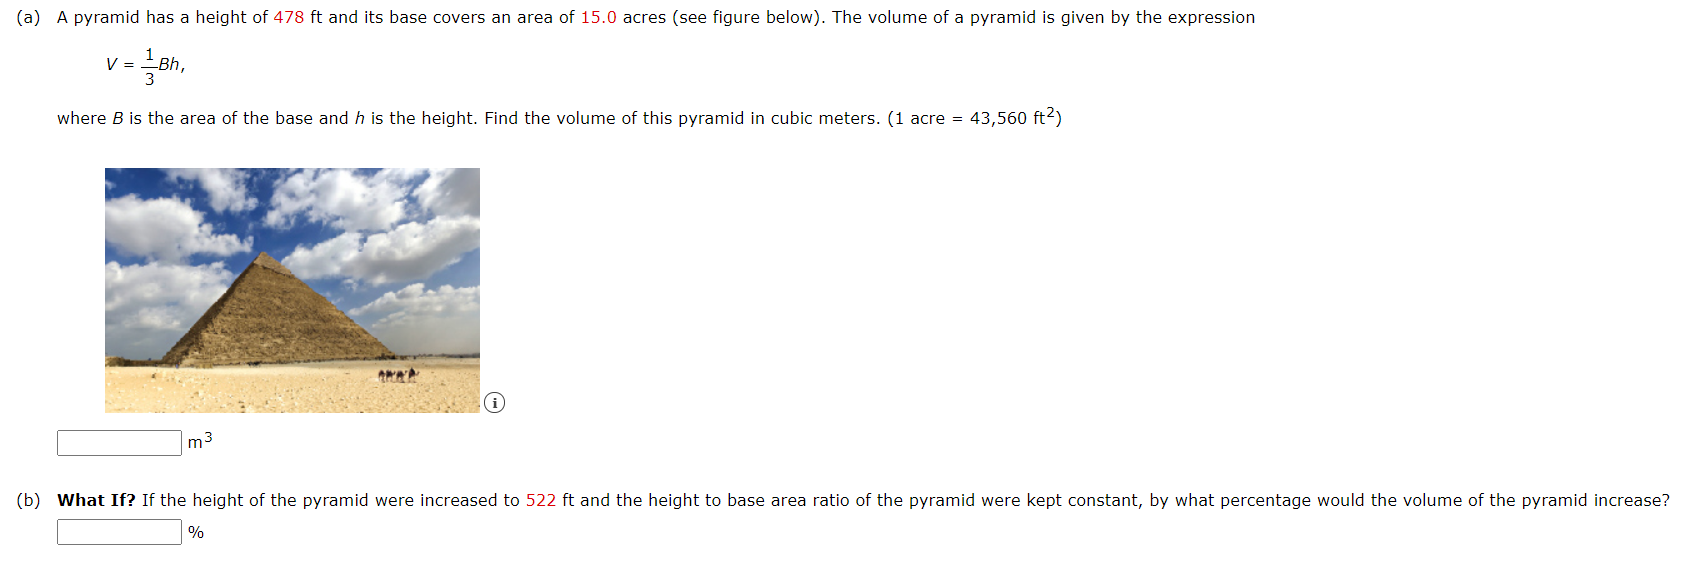 (a) A pyramid has a height of 478 ft and its base covers an area of 15.0 acres (see figure below). The volume of a pyramid is given by the expression
V =
where B is the area of the base and h is the height. Find the volume of this pyramid in cubic meters. (1 acre = 43,560 ft2)
m3
(b) What If? If the height of the pyramid were increased to 522 ft and the height to base area ratio of the pyramid were kept constant, by what percentage would the volume of the pyramid increase?
%
